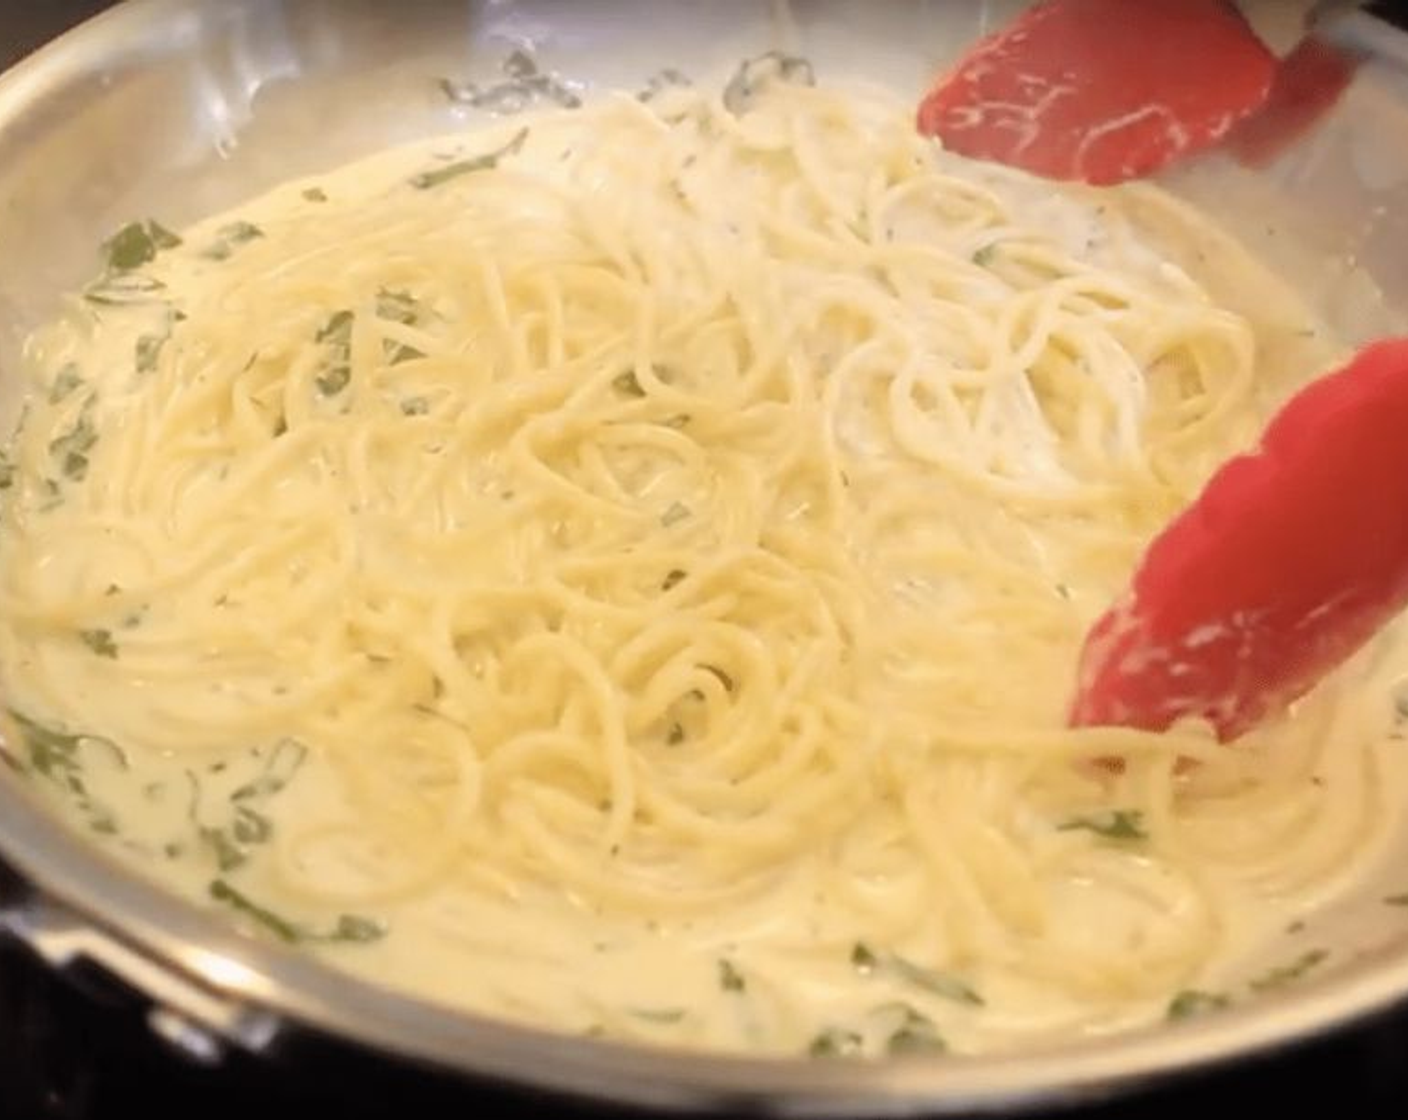 step 7 Add the cooked spaghetti, Fresh Parsley (2 Tbsp), Salt (to taste), and Ground Black Pepper (to taste). Toss to coat.